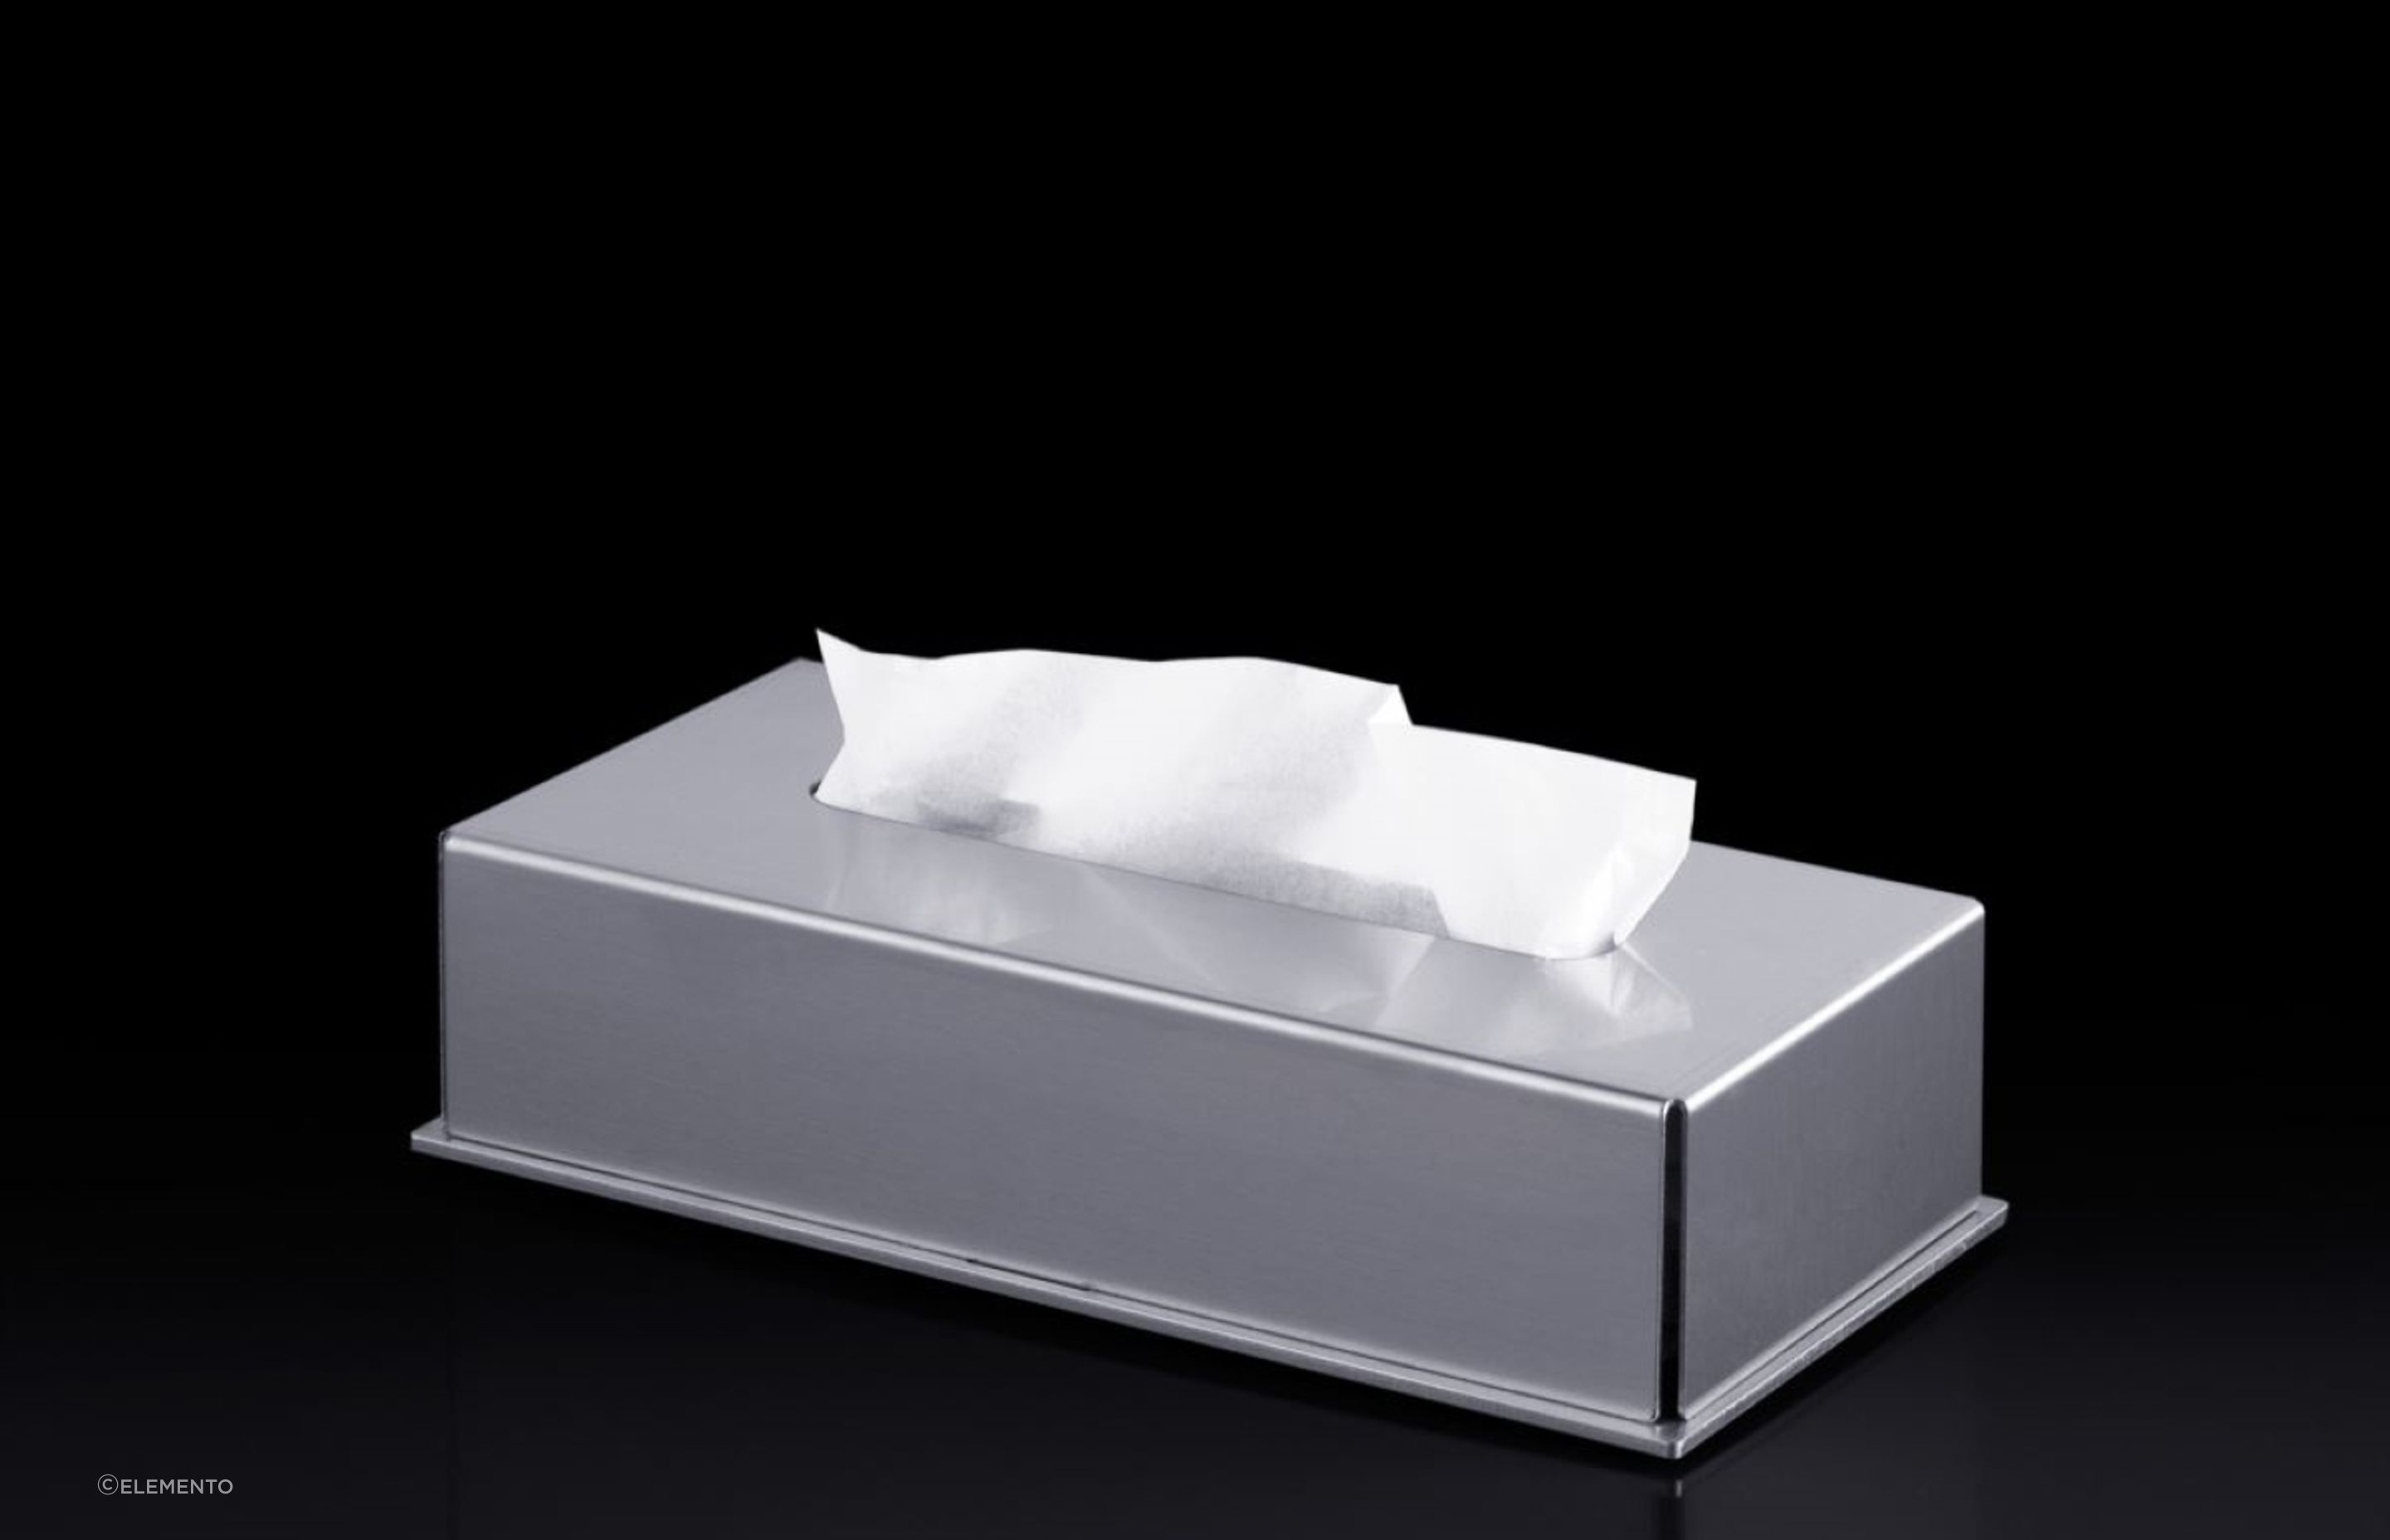 The Blade Tissue Box Holder provides a refined aesthetic and protects tissue boxes from moisture.